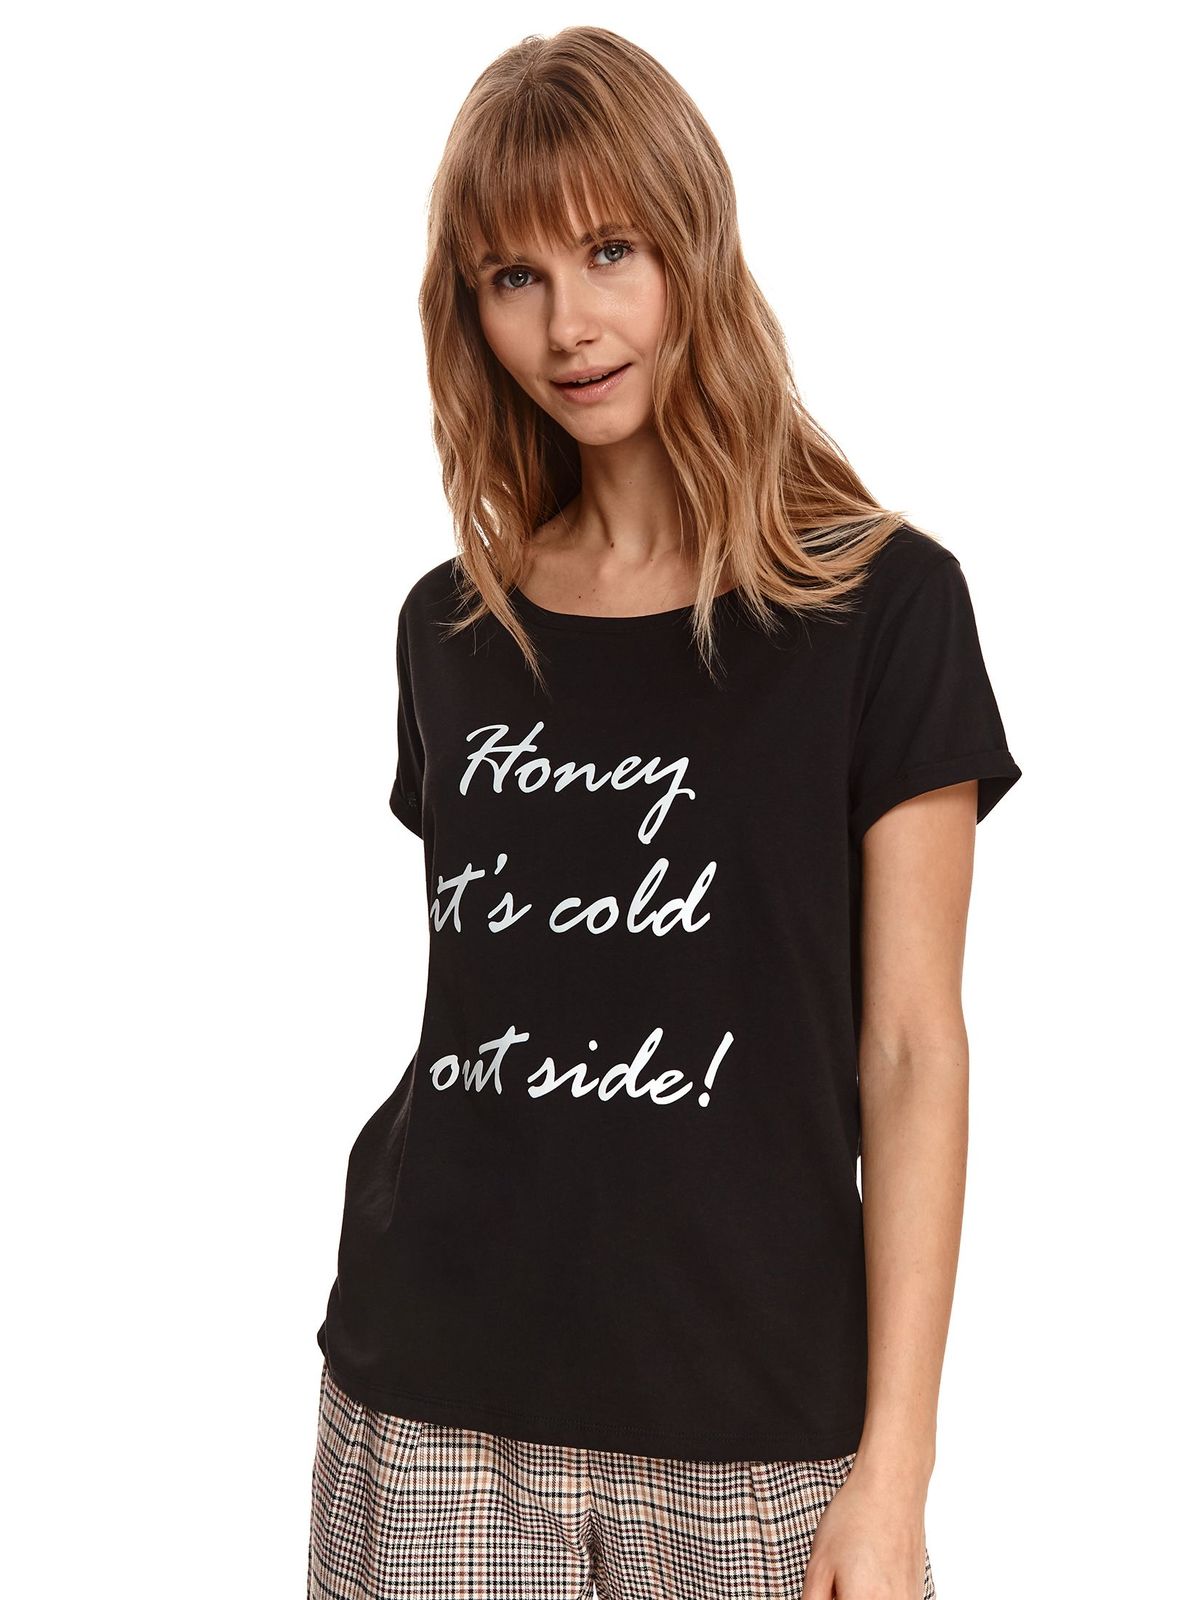 Black t-shirt cotton with rounded cleavage loose fit